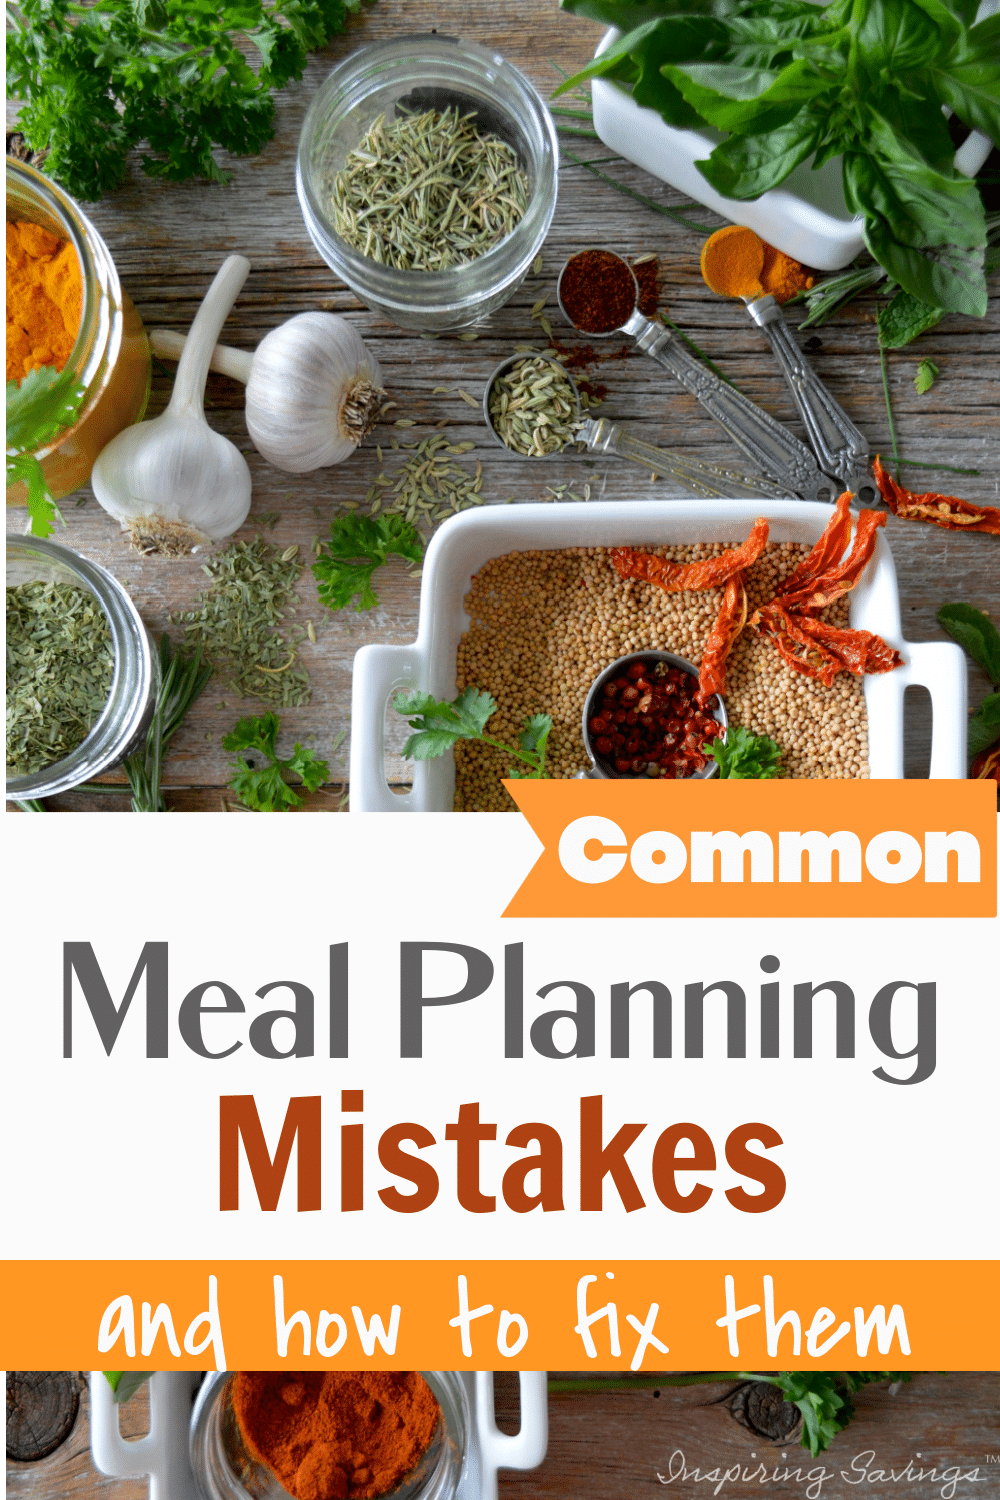 Common Meal Planning Mistakes